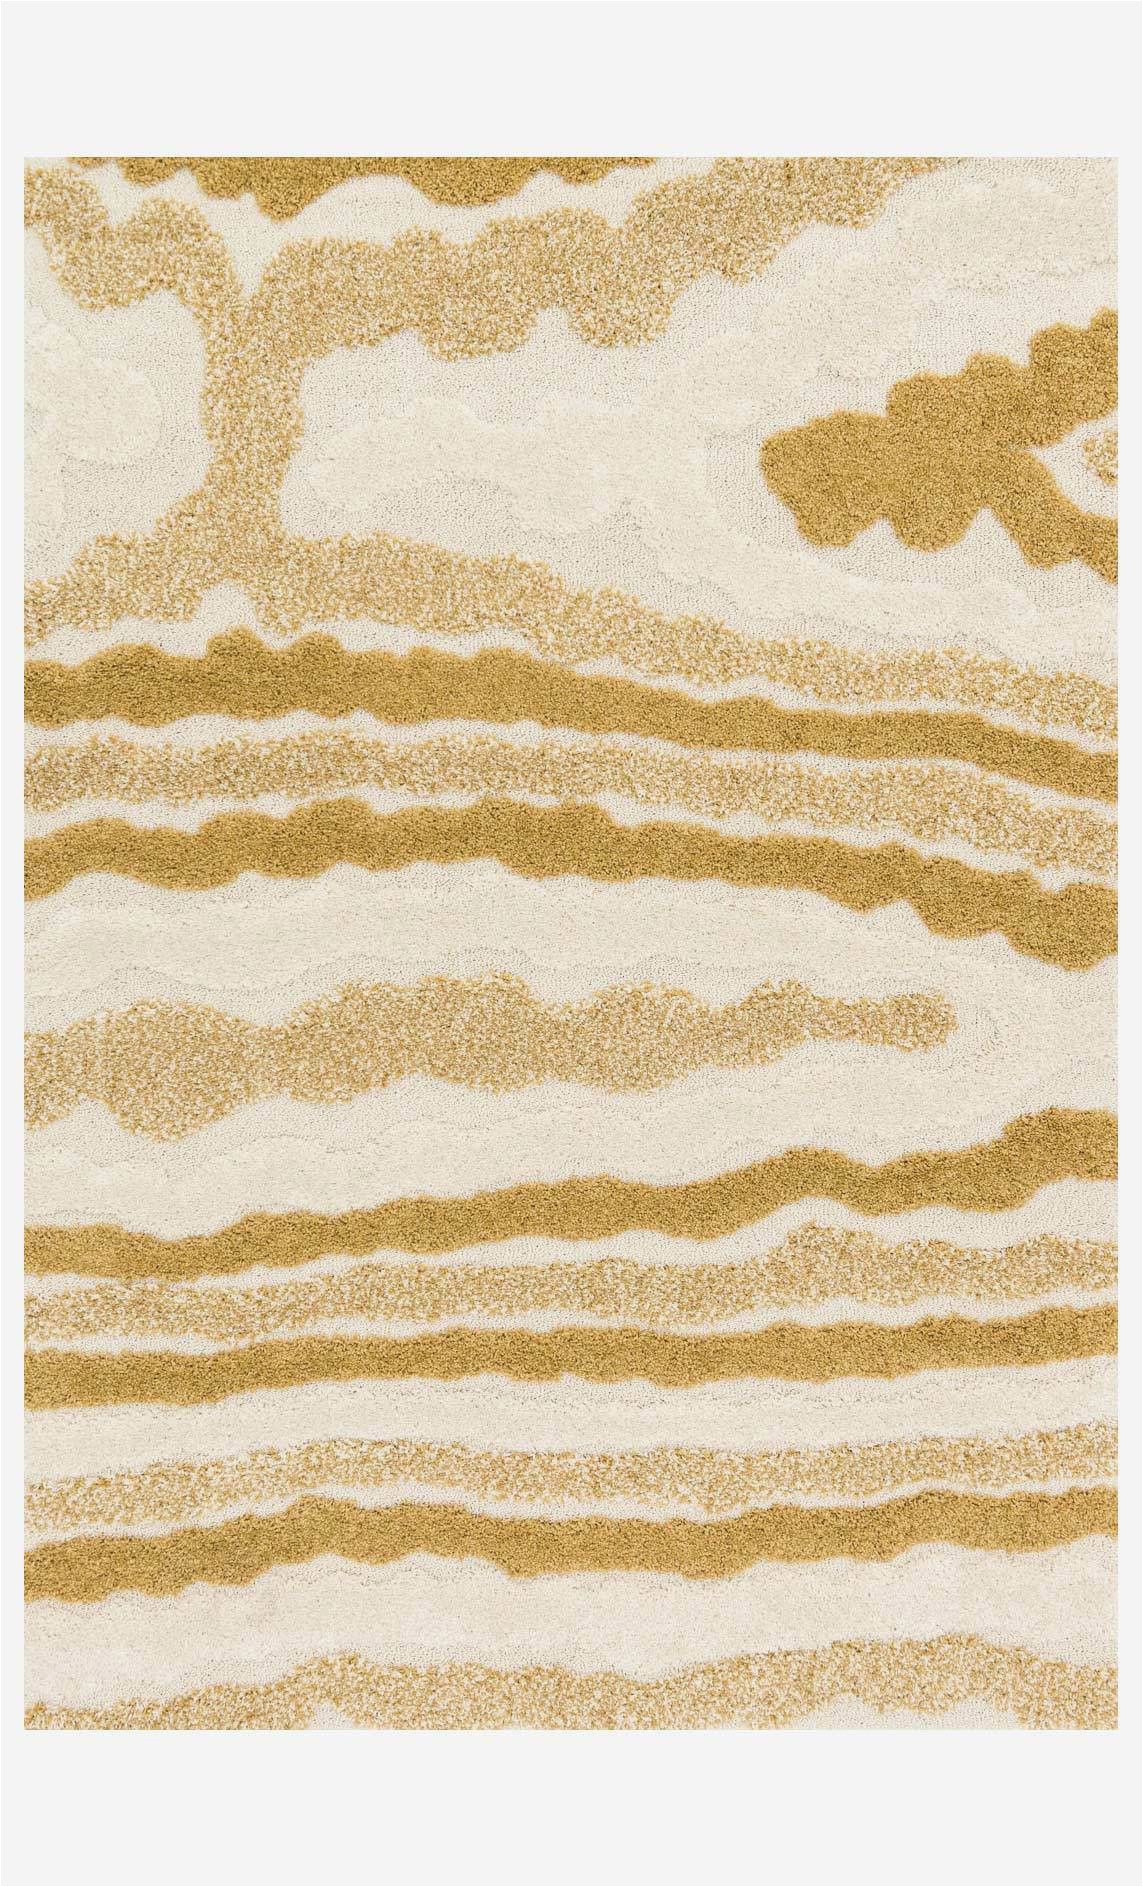 Earth tone Color area Rugs En 19 Ivory Gold Loloi Rugs In 2020